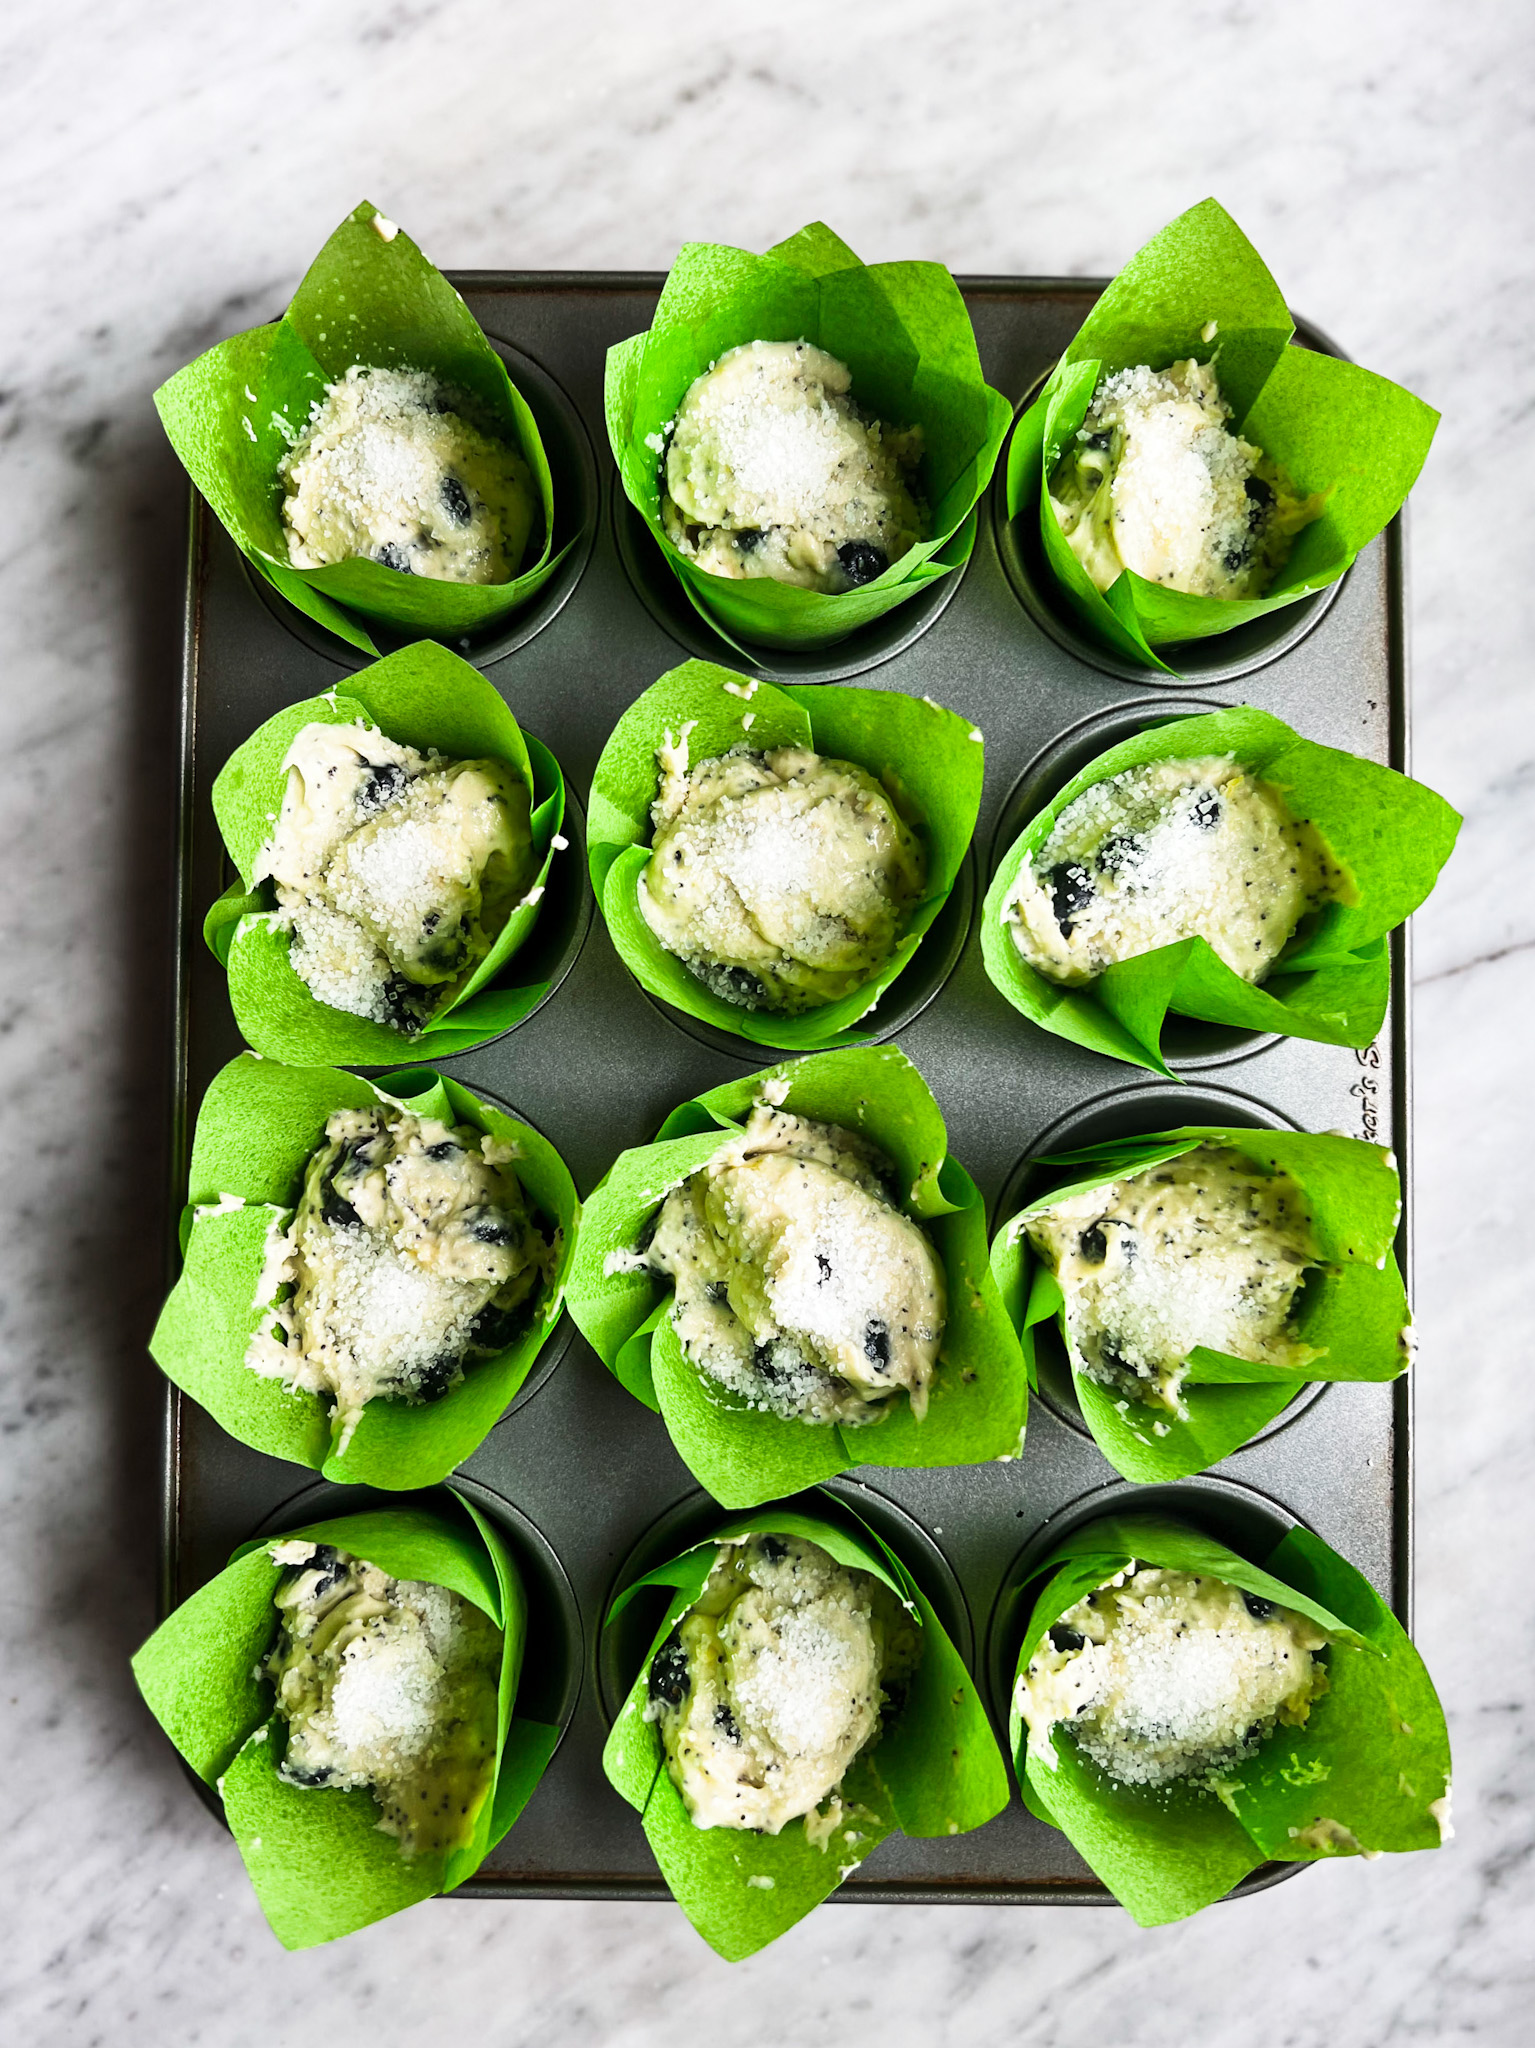 lemon blueberry muffin batter in muffin tins with green muffin liners